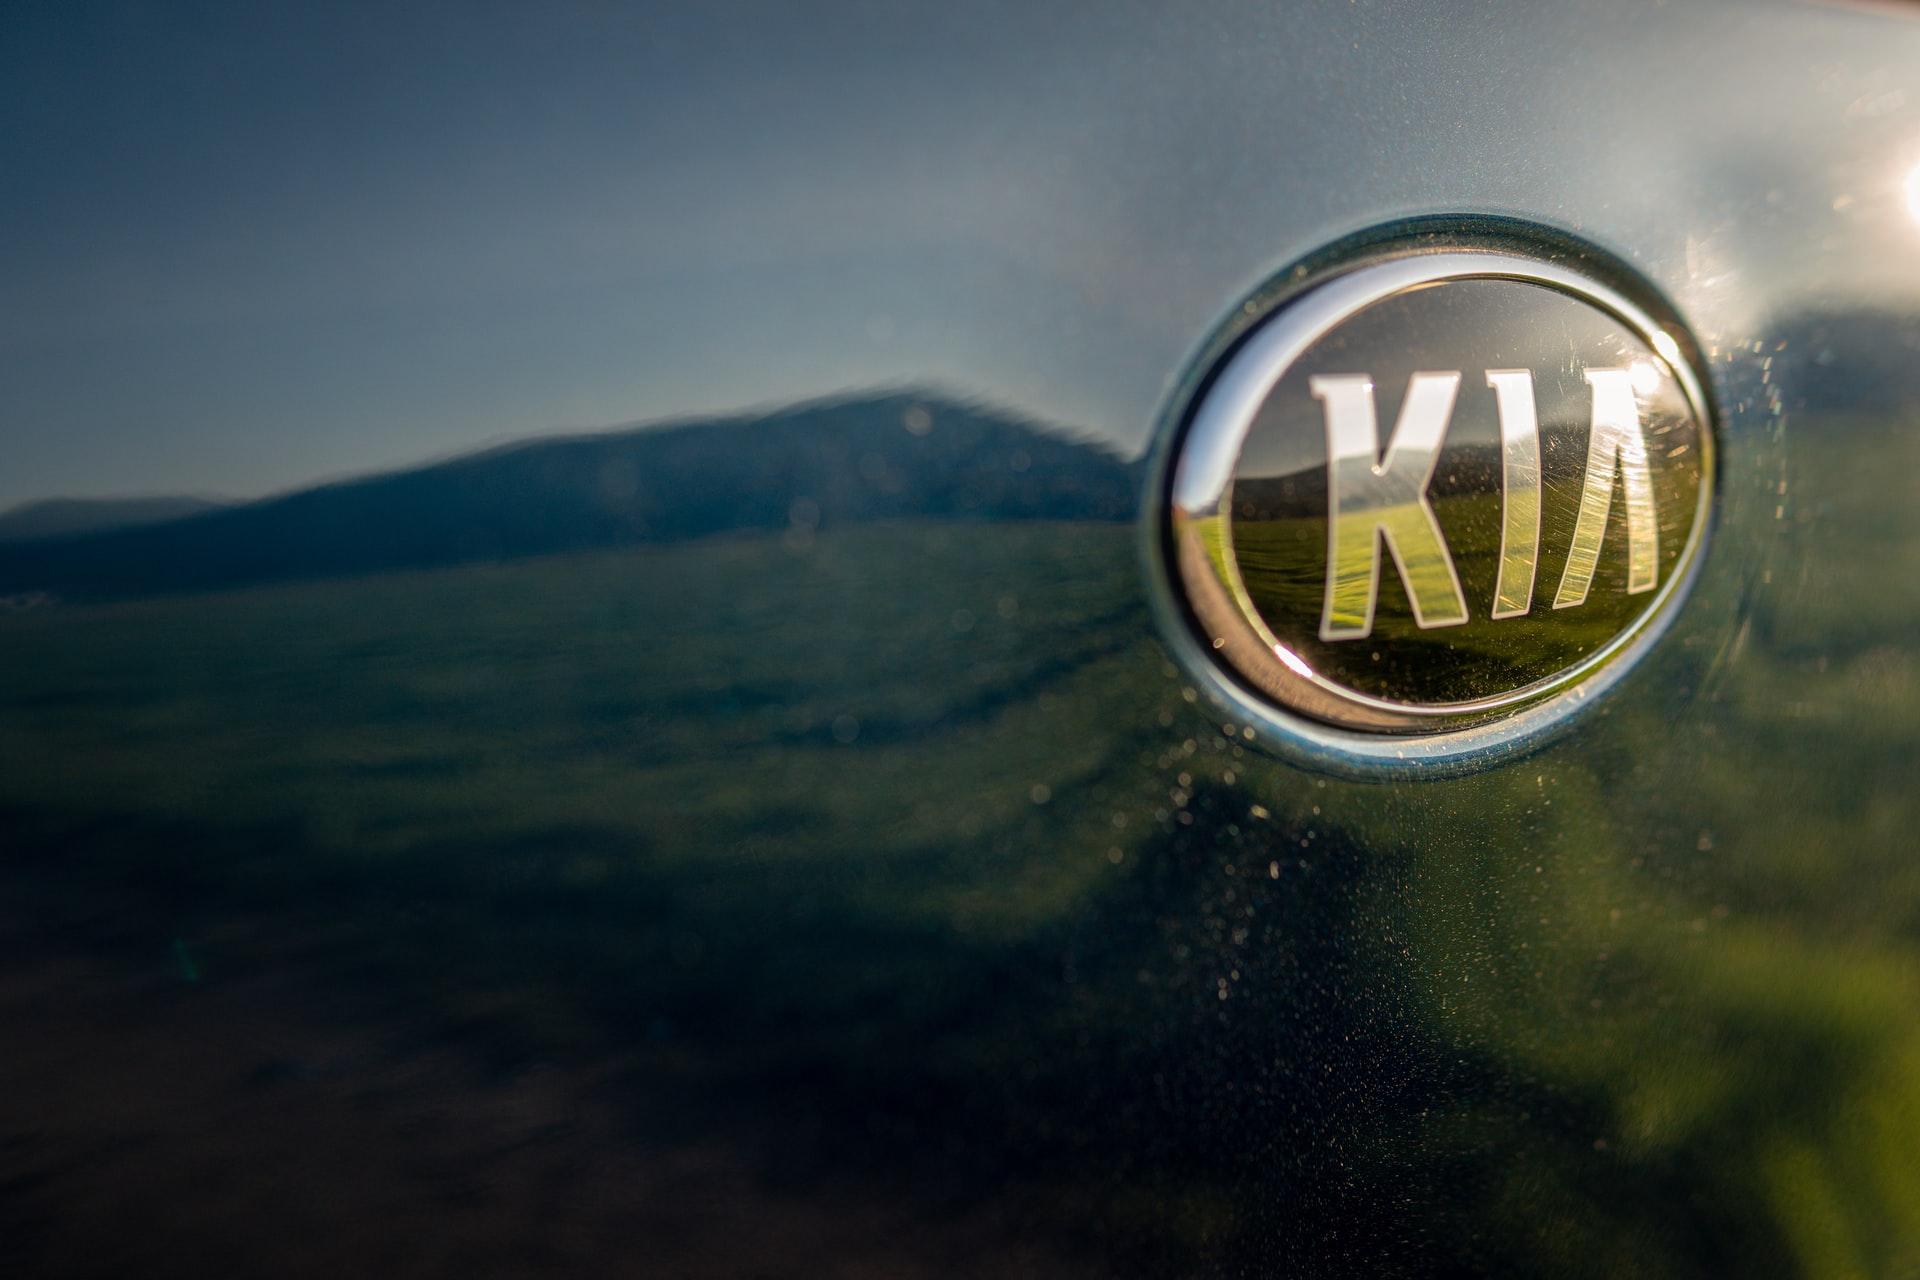 Have you ever wondered whether Kia or Hyundai is the better brand?